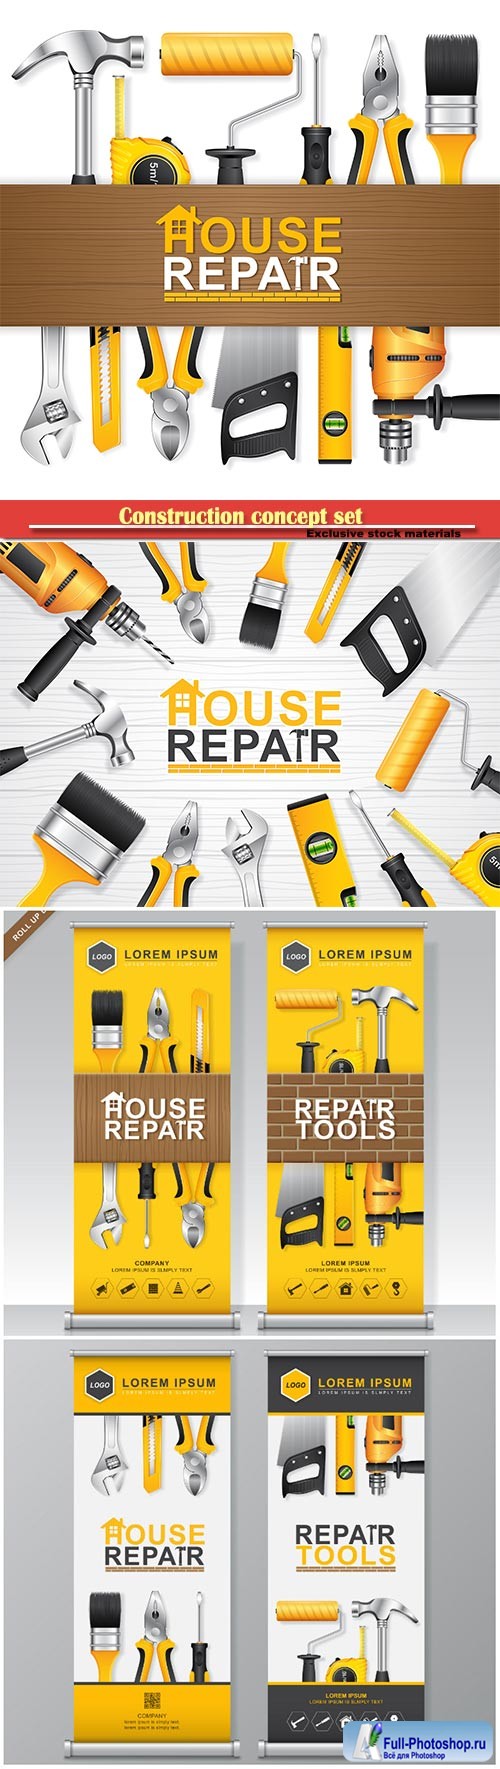 Construction concept set all of tools supplies for house repair builder